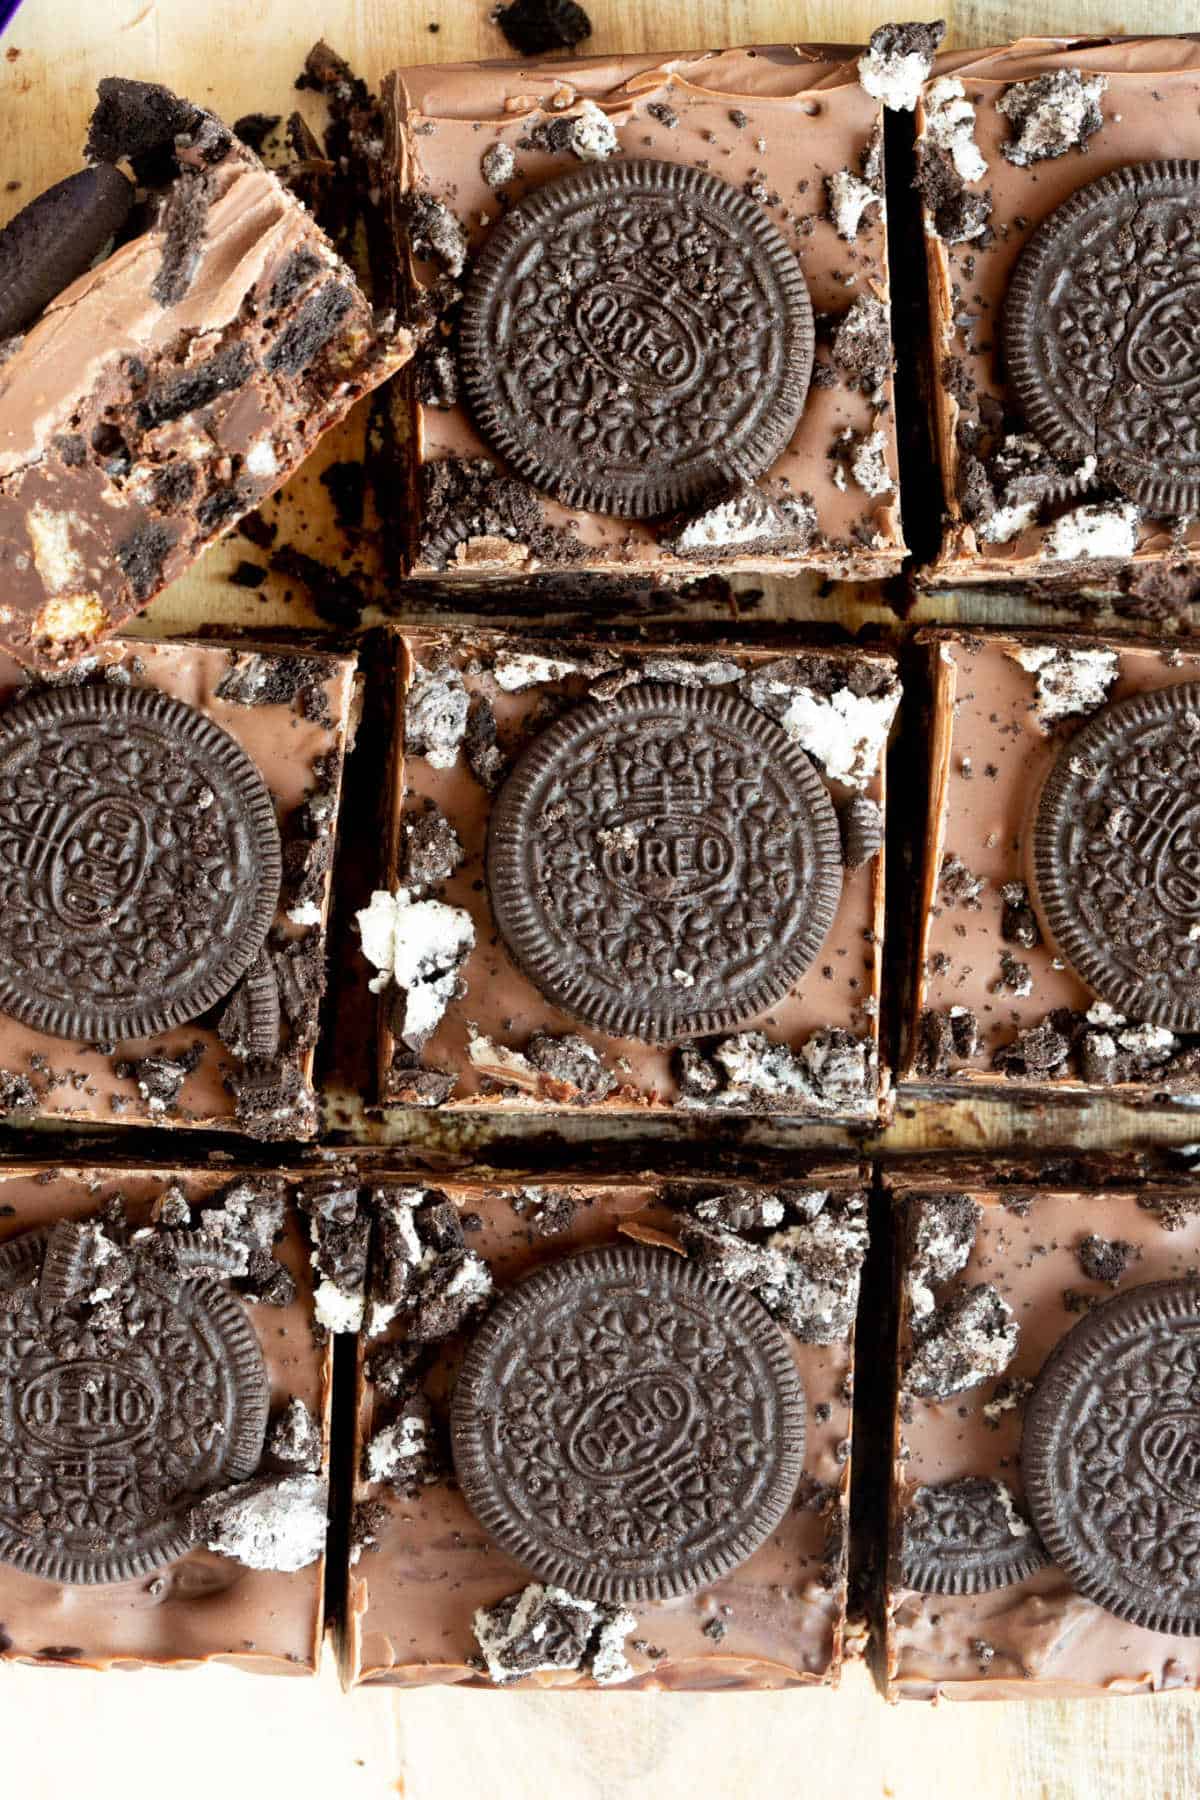 Oreo tiffin bars on a wooden board.